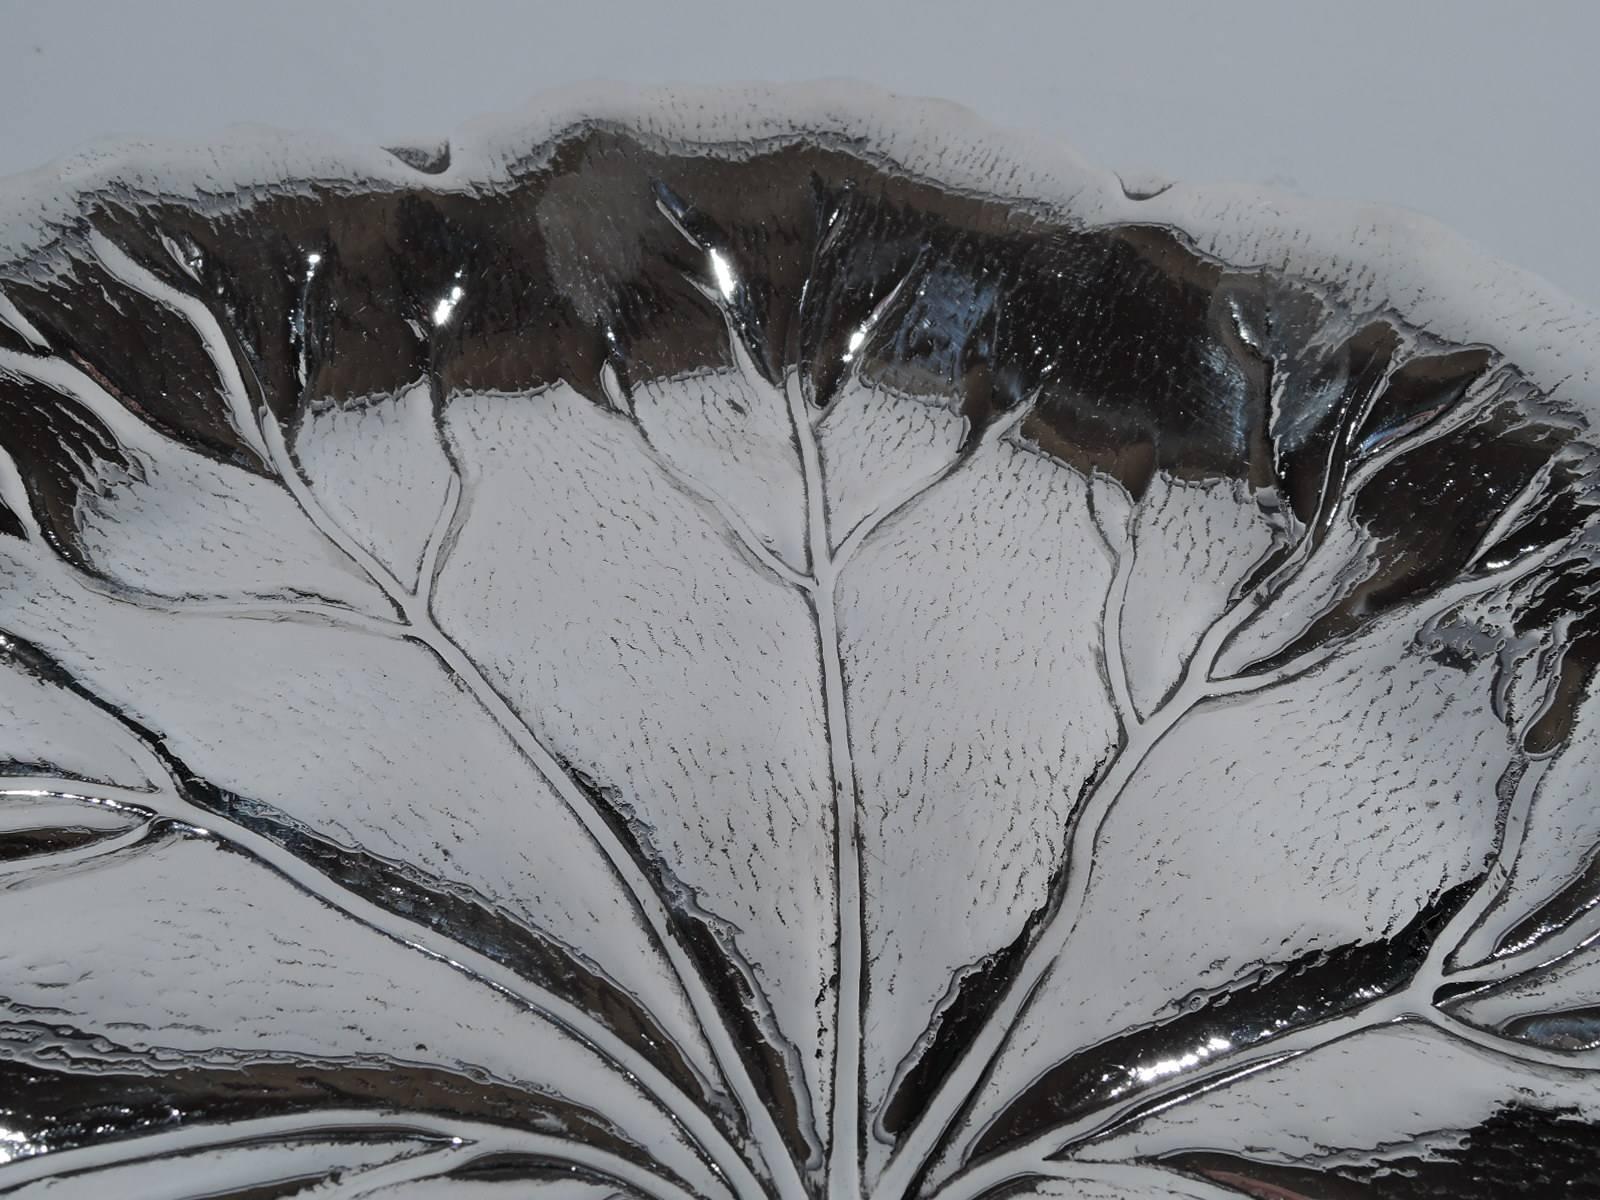 Beautiful sterling silver leaf bowl. Made by International in Meriden, Conn, circa 1950. Round with tapering sides and irregular rim. Interior veined and striated. Hallmark includes no. H125. Weight: 12 troy ounces.